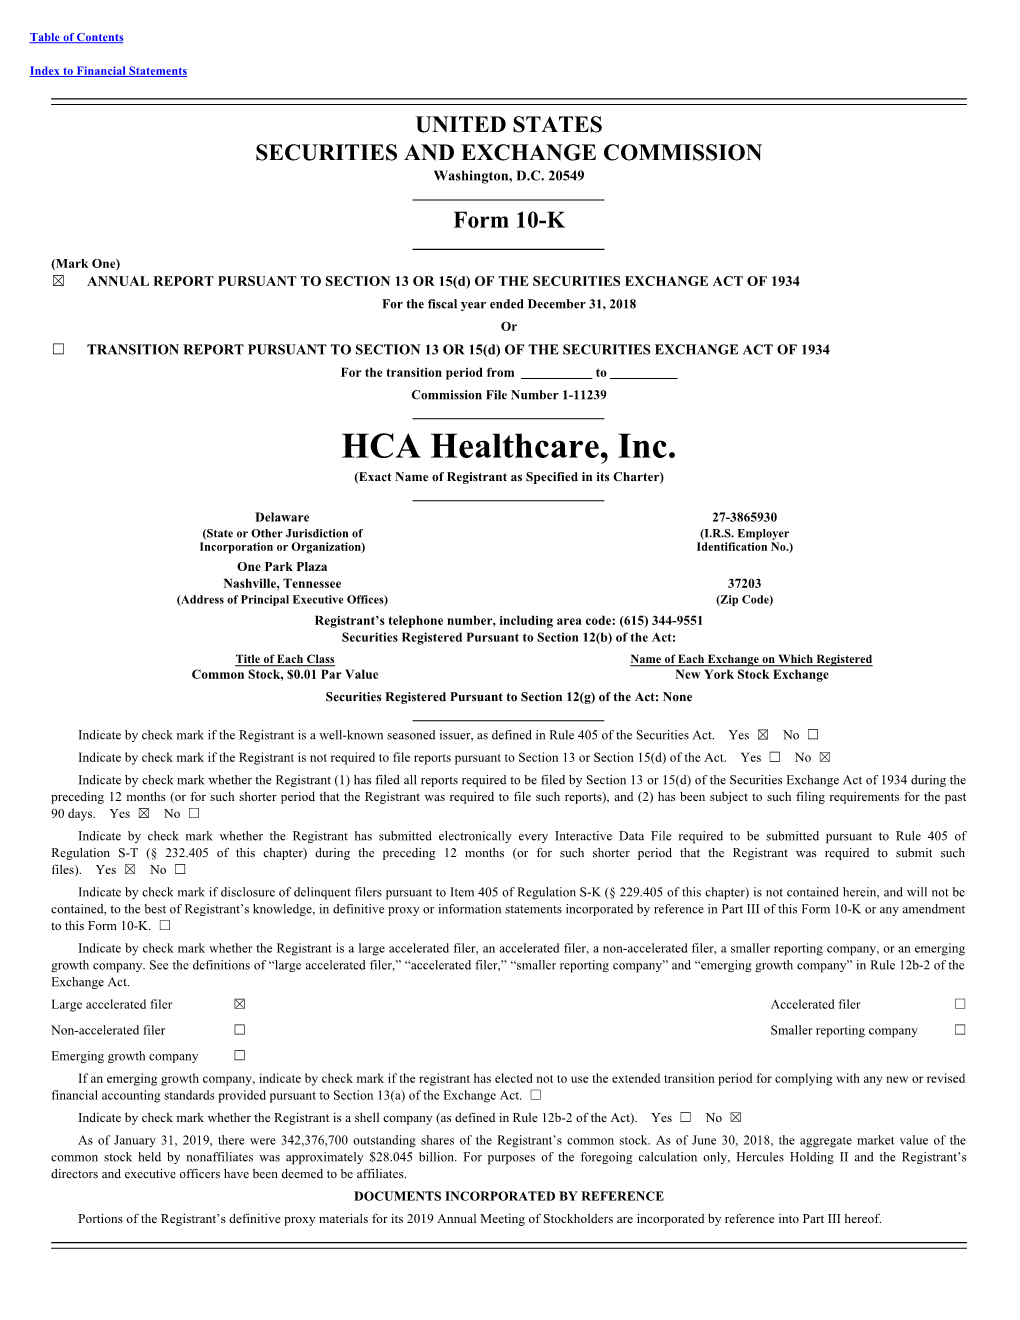 HCA Healthcare, Inc. (Exact Name of Registrant As Specified in Its Charter)